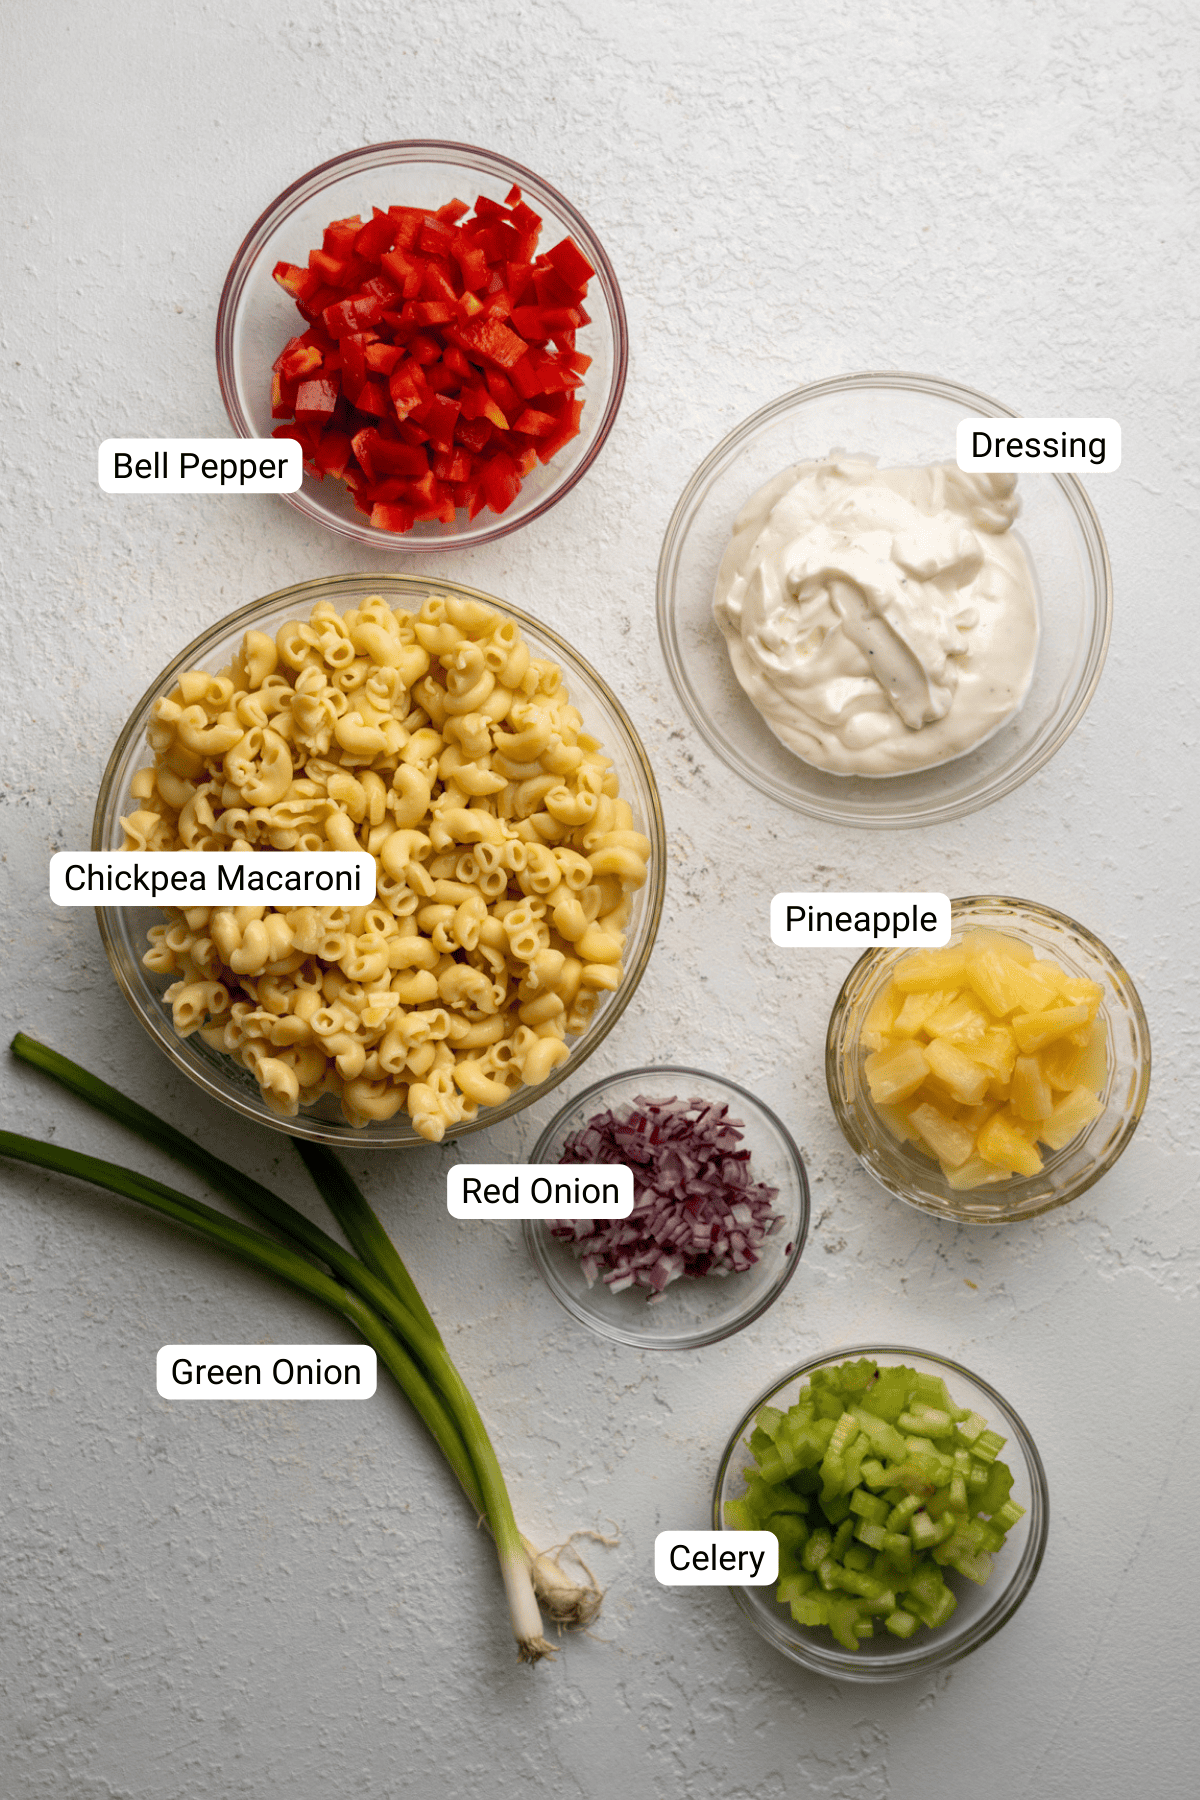 Macaroni salad ingredients including bell pepper, pineapple, and red onion.